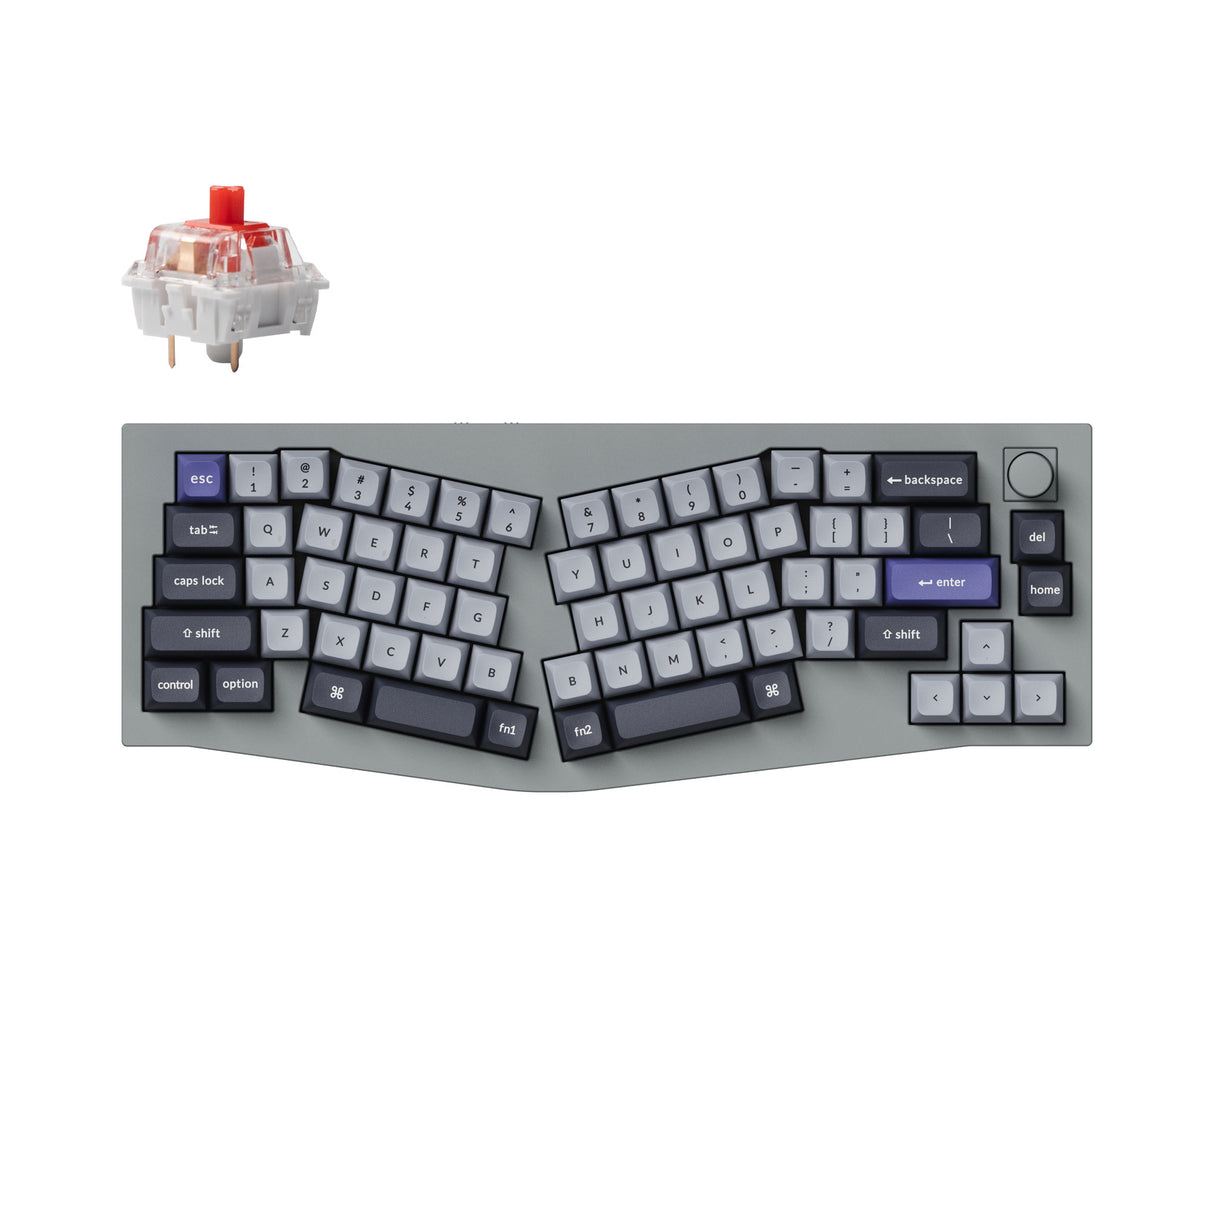 Keychron Q8 Pro QMK/VIA wireless custom mechanical keyboard 65 percent Alice layout full aluminum grey frame for Mac Windows Linux with RGB backlight hot-swappable K Pro red